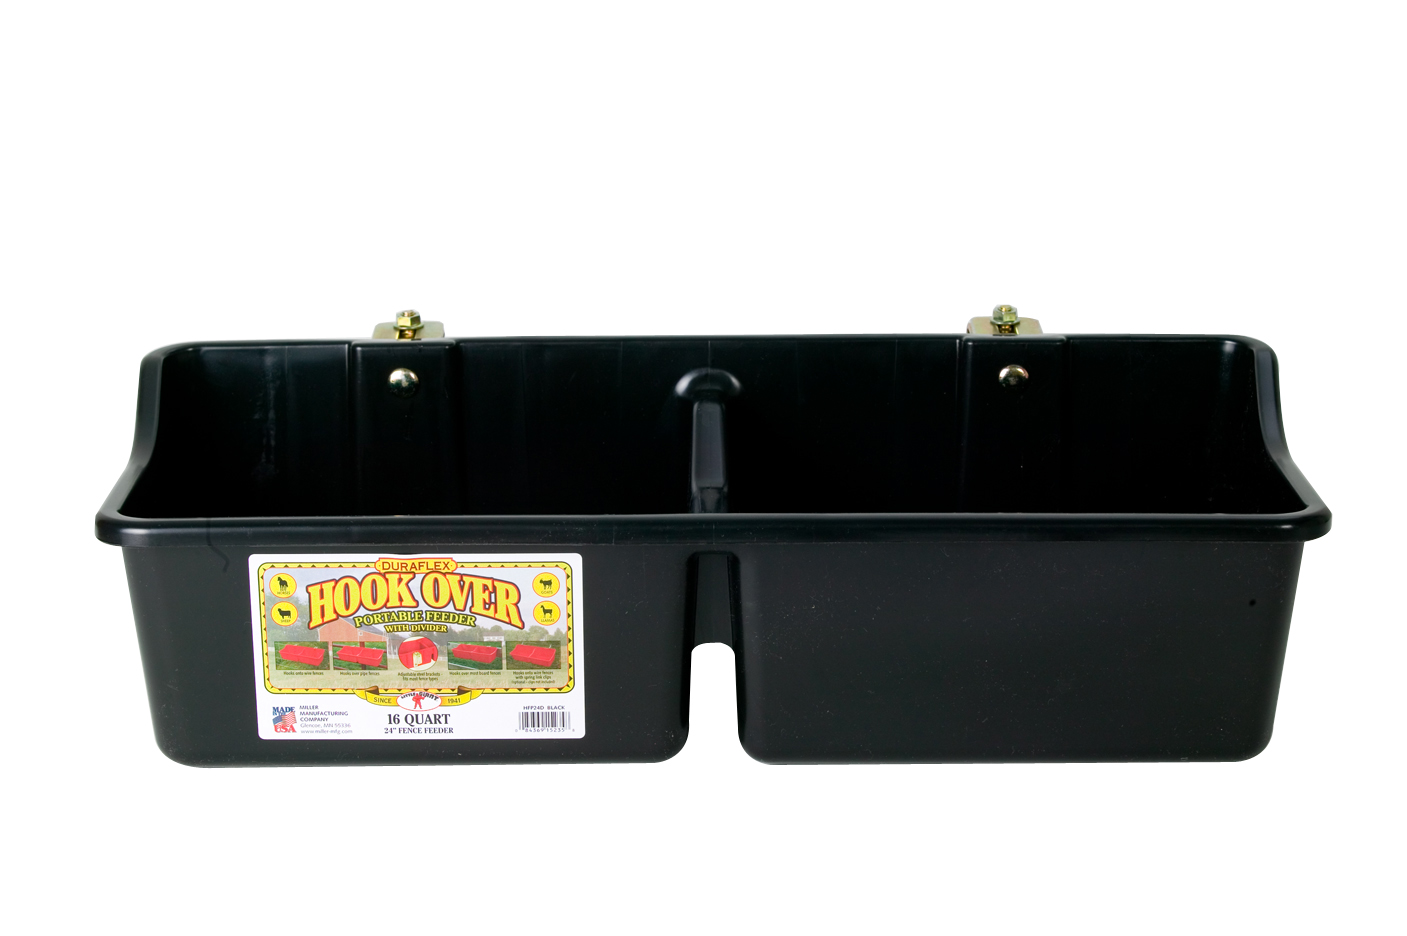 Double Hookover Feed 16 Quart